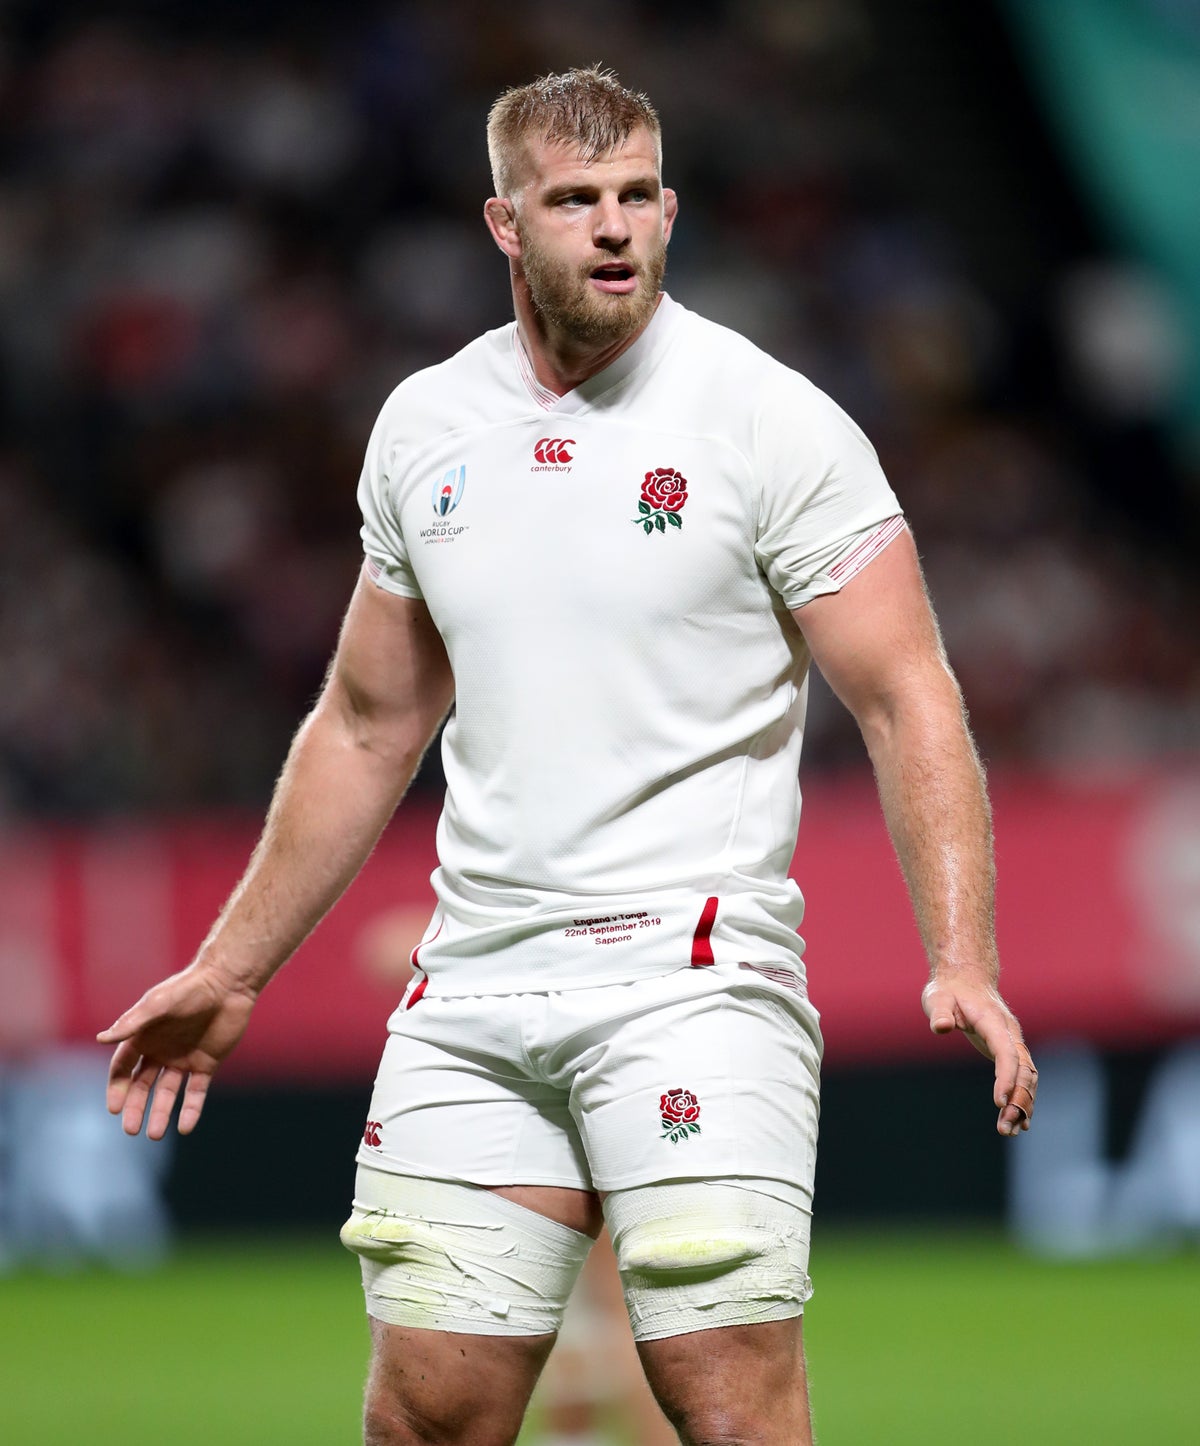 George ready to Kruis off into sunset after Barbarians swansong at Twickenham